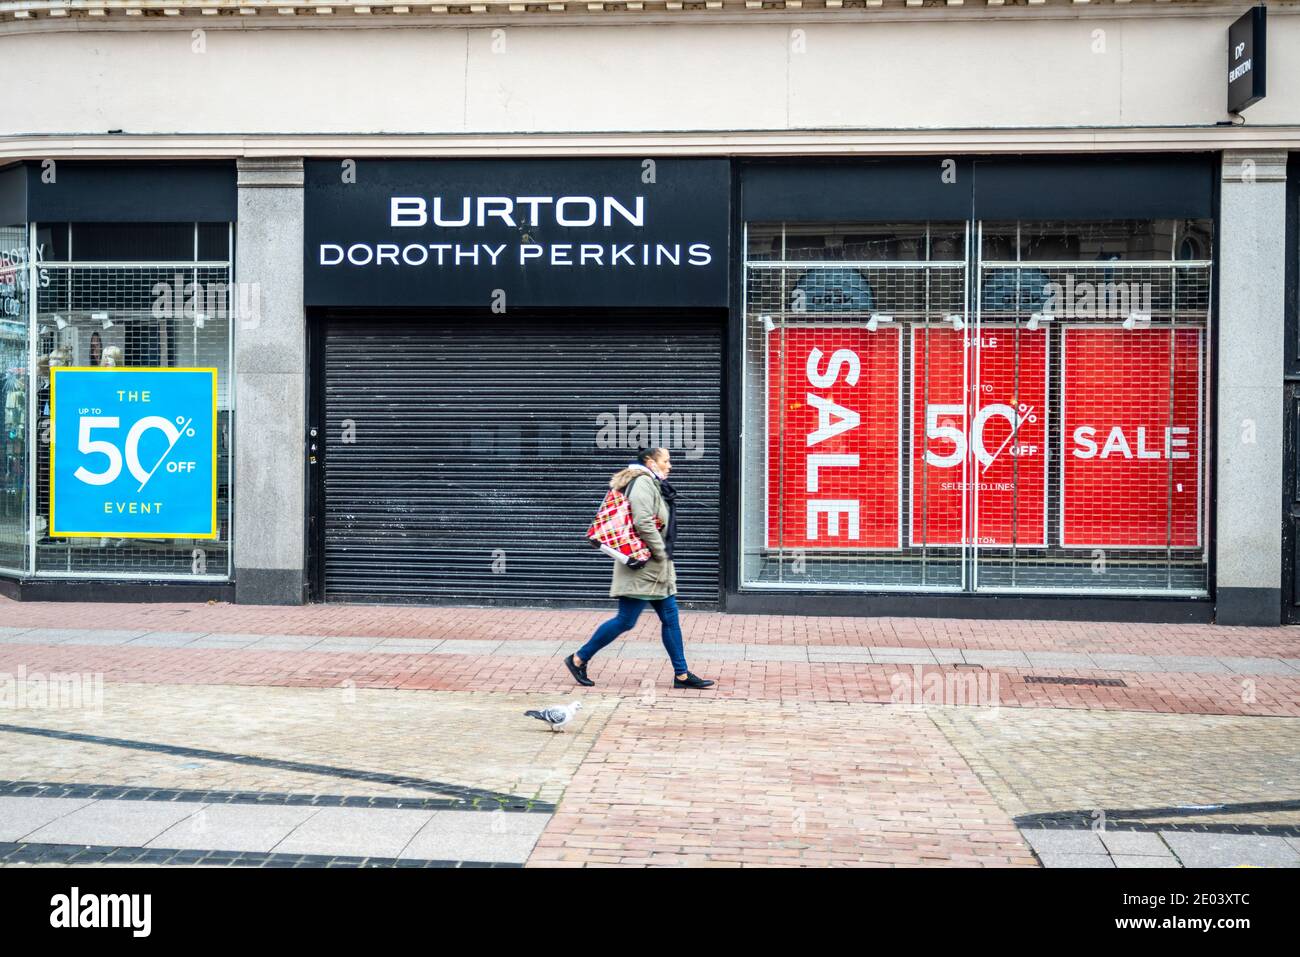 Closed Arcadia Group Burton, Dorothy Perkins shop in High Street, in  Southend on Sea, Essex, UK. Shopper passing by. Half price sale posters  Stock Photo - Alamy